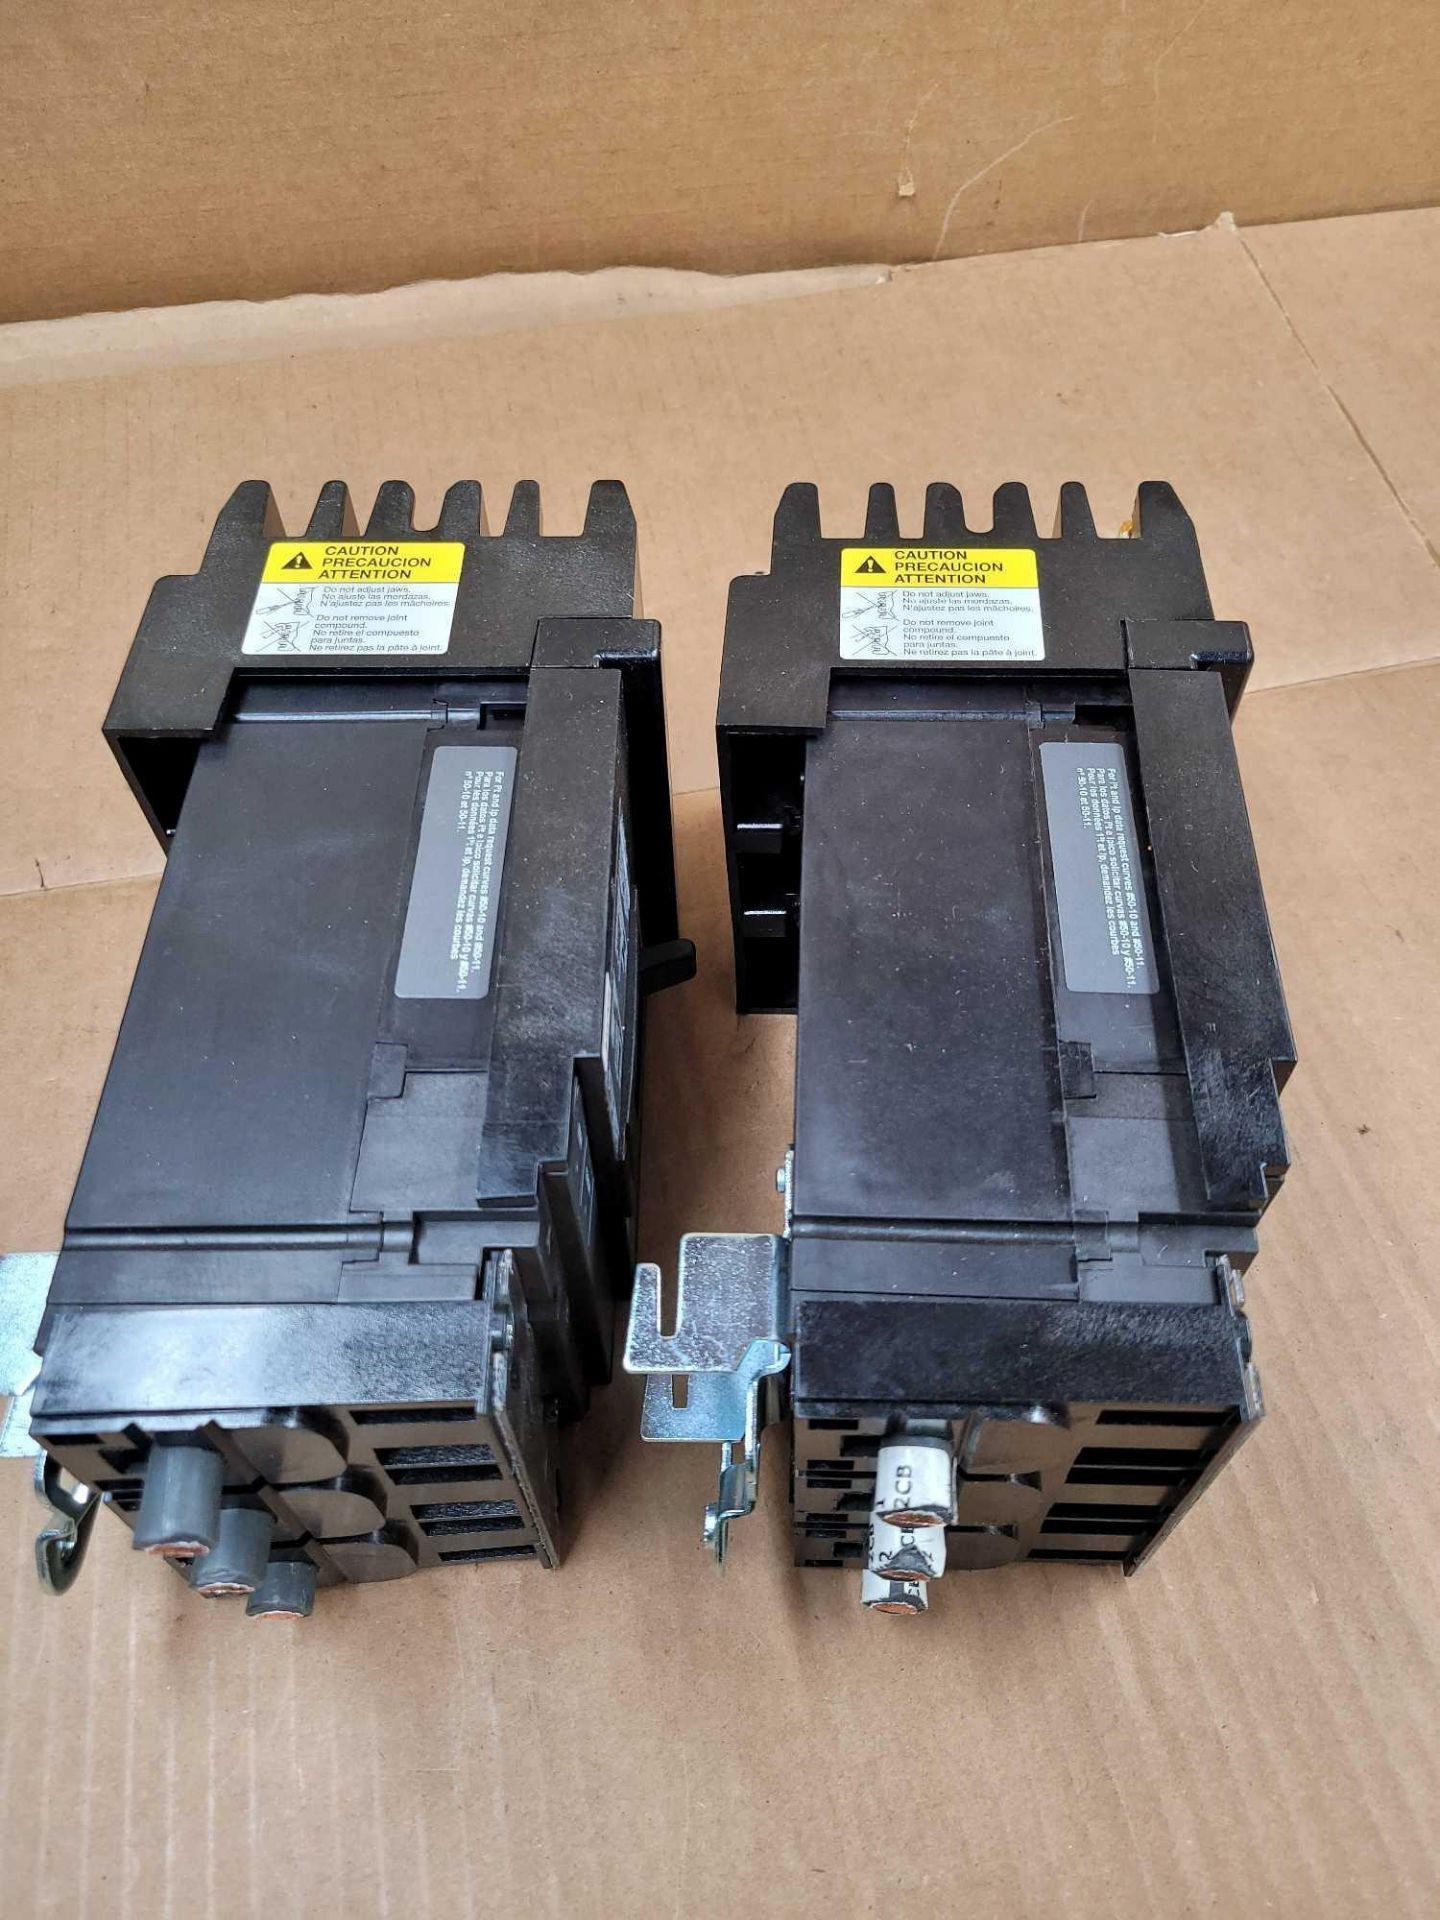 LOT OF 2 SQUARE D HJA36100 / 100 Amp Molded Case Circuit Breaker  /  Lot Weight: 9.4 lbs - Image 6 of 6